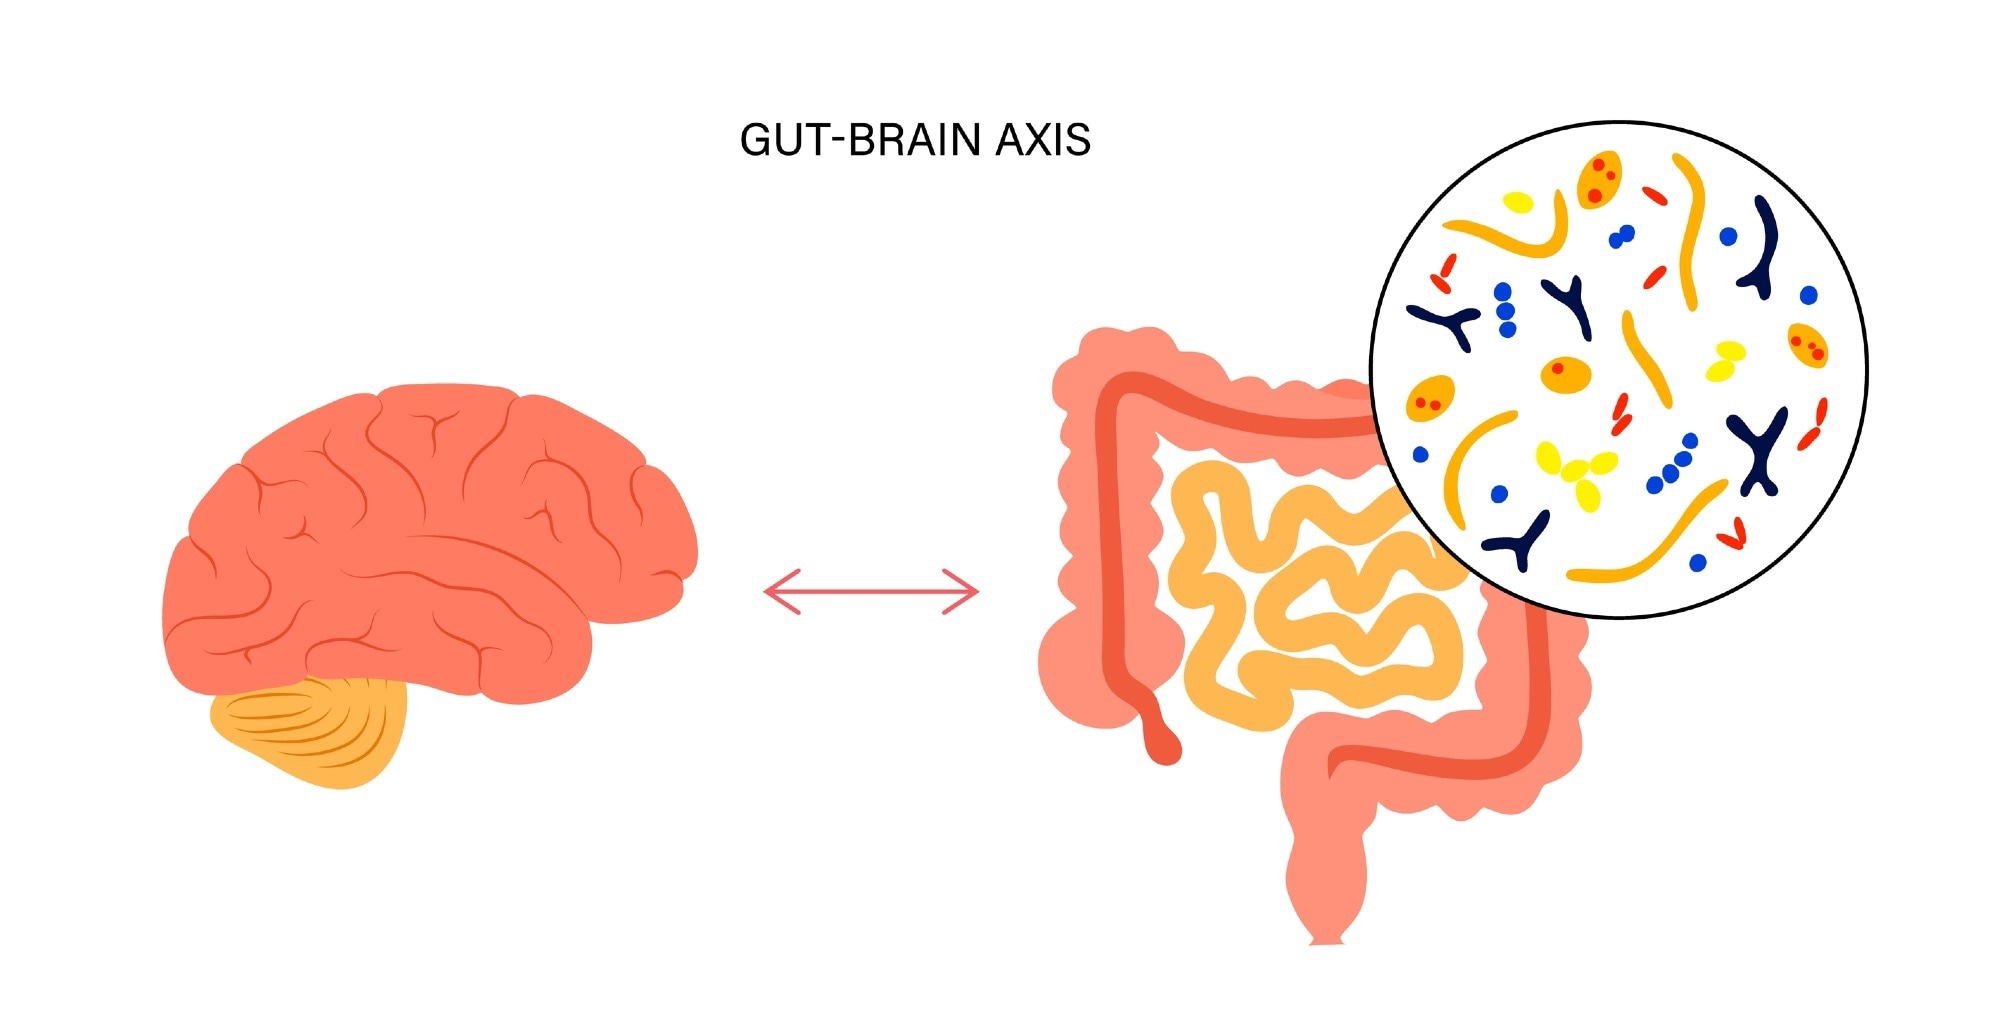 Study: The gut-to-brain axis for toxin-induced defensive responses. Image Credit: Pikovit/Shutterstock